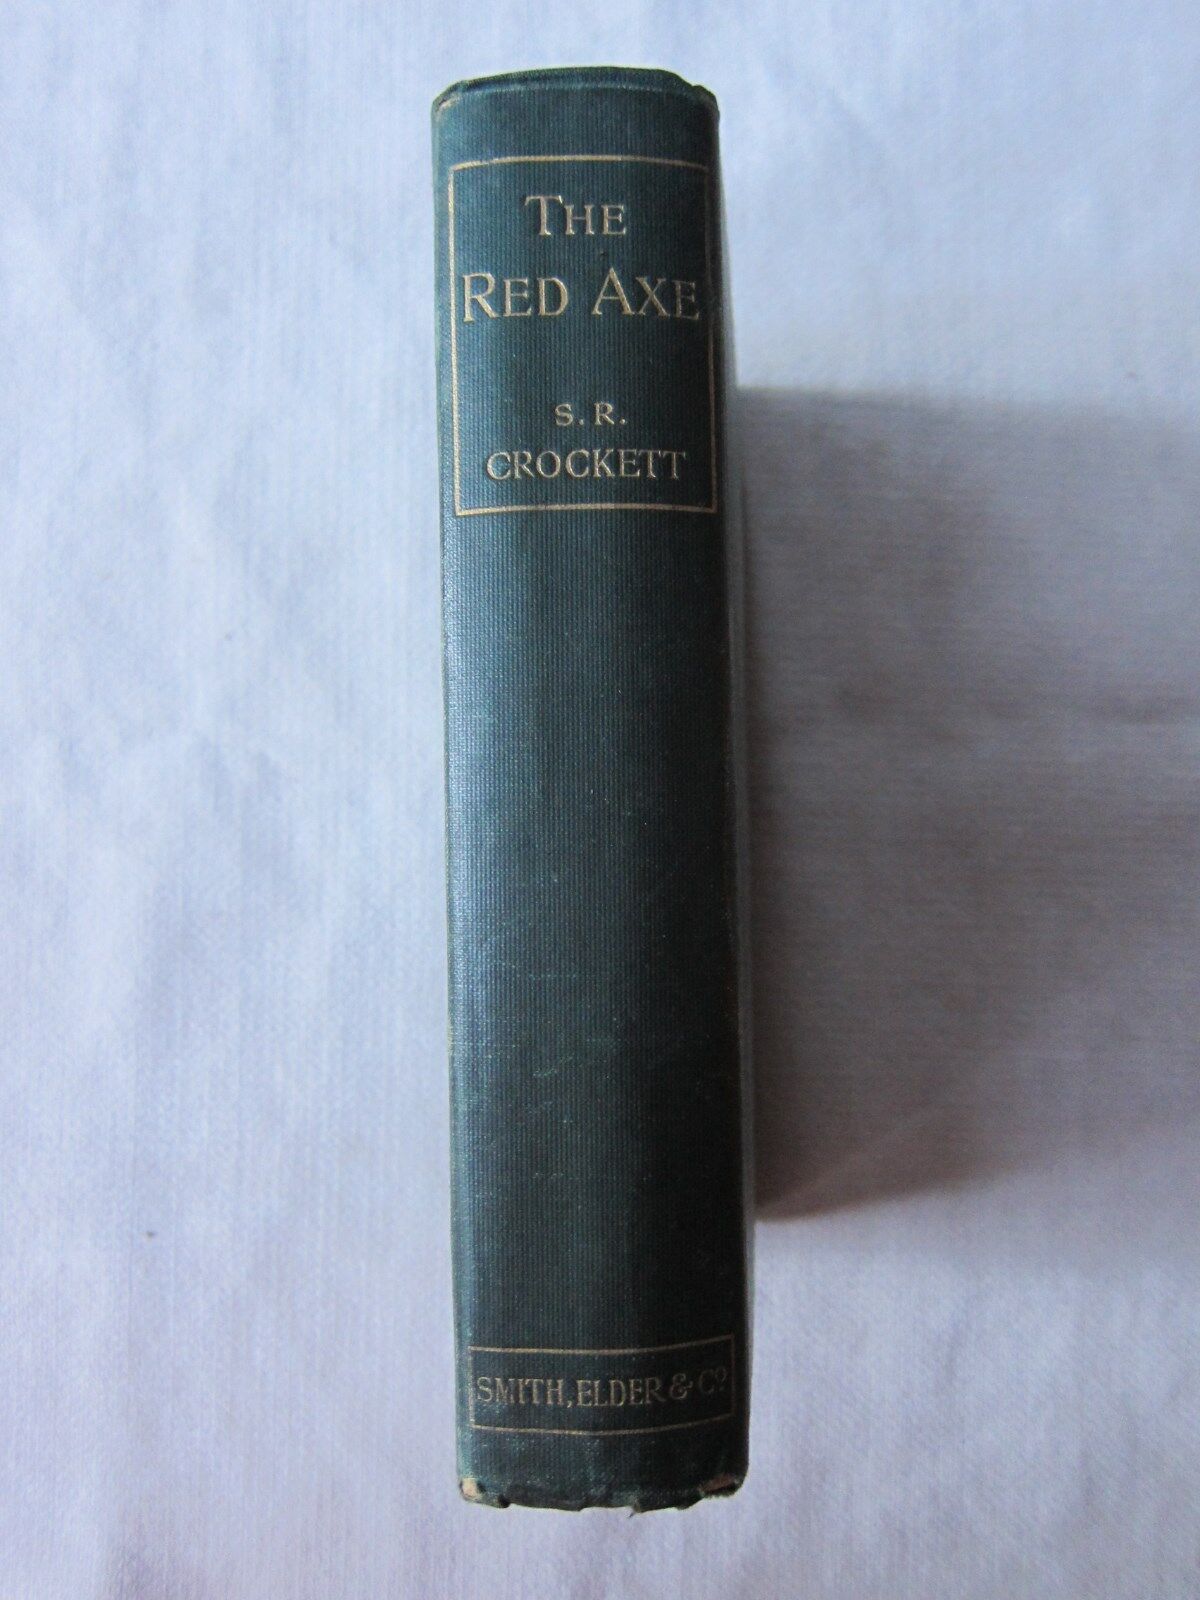  Old Antique Book The Red Axe by S.R. Crockett 1898 1st Ed. GC